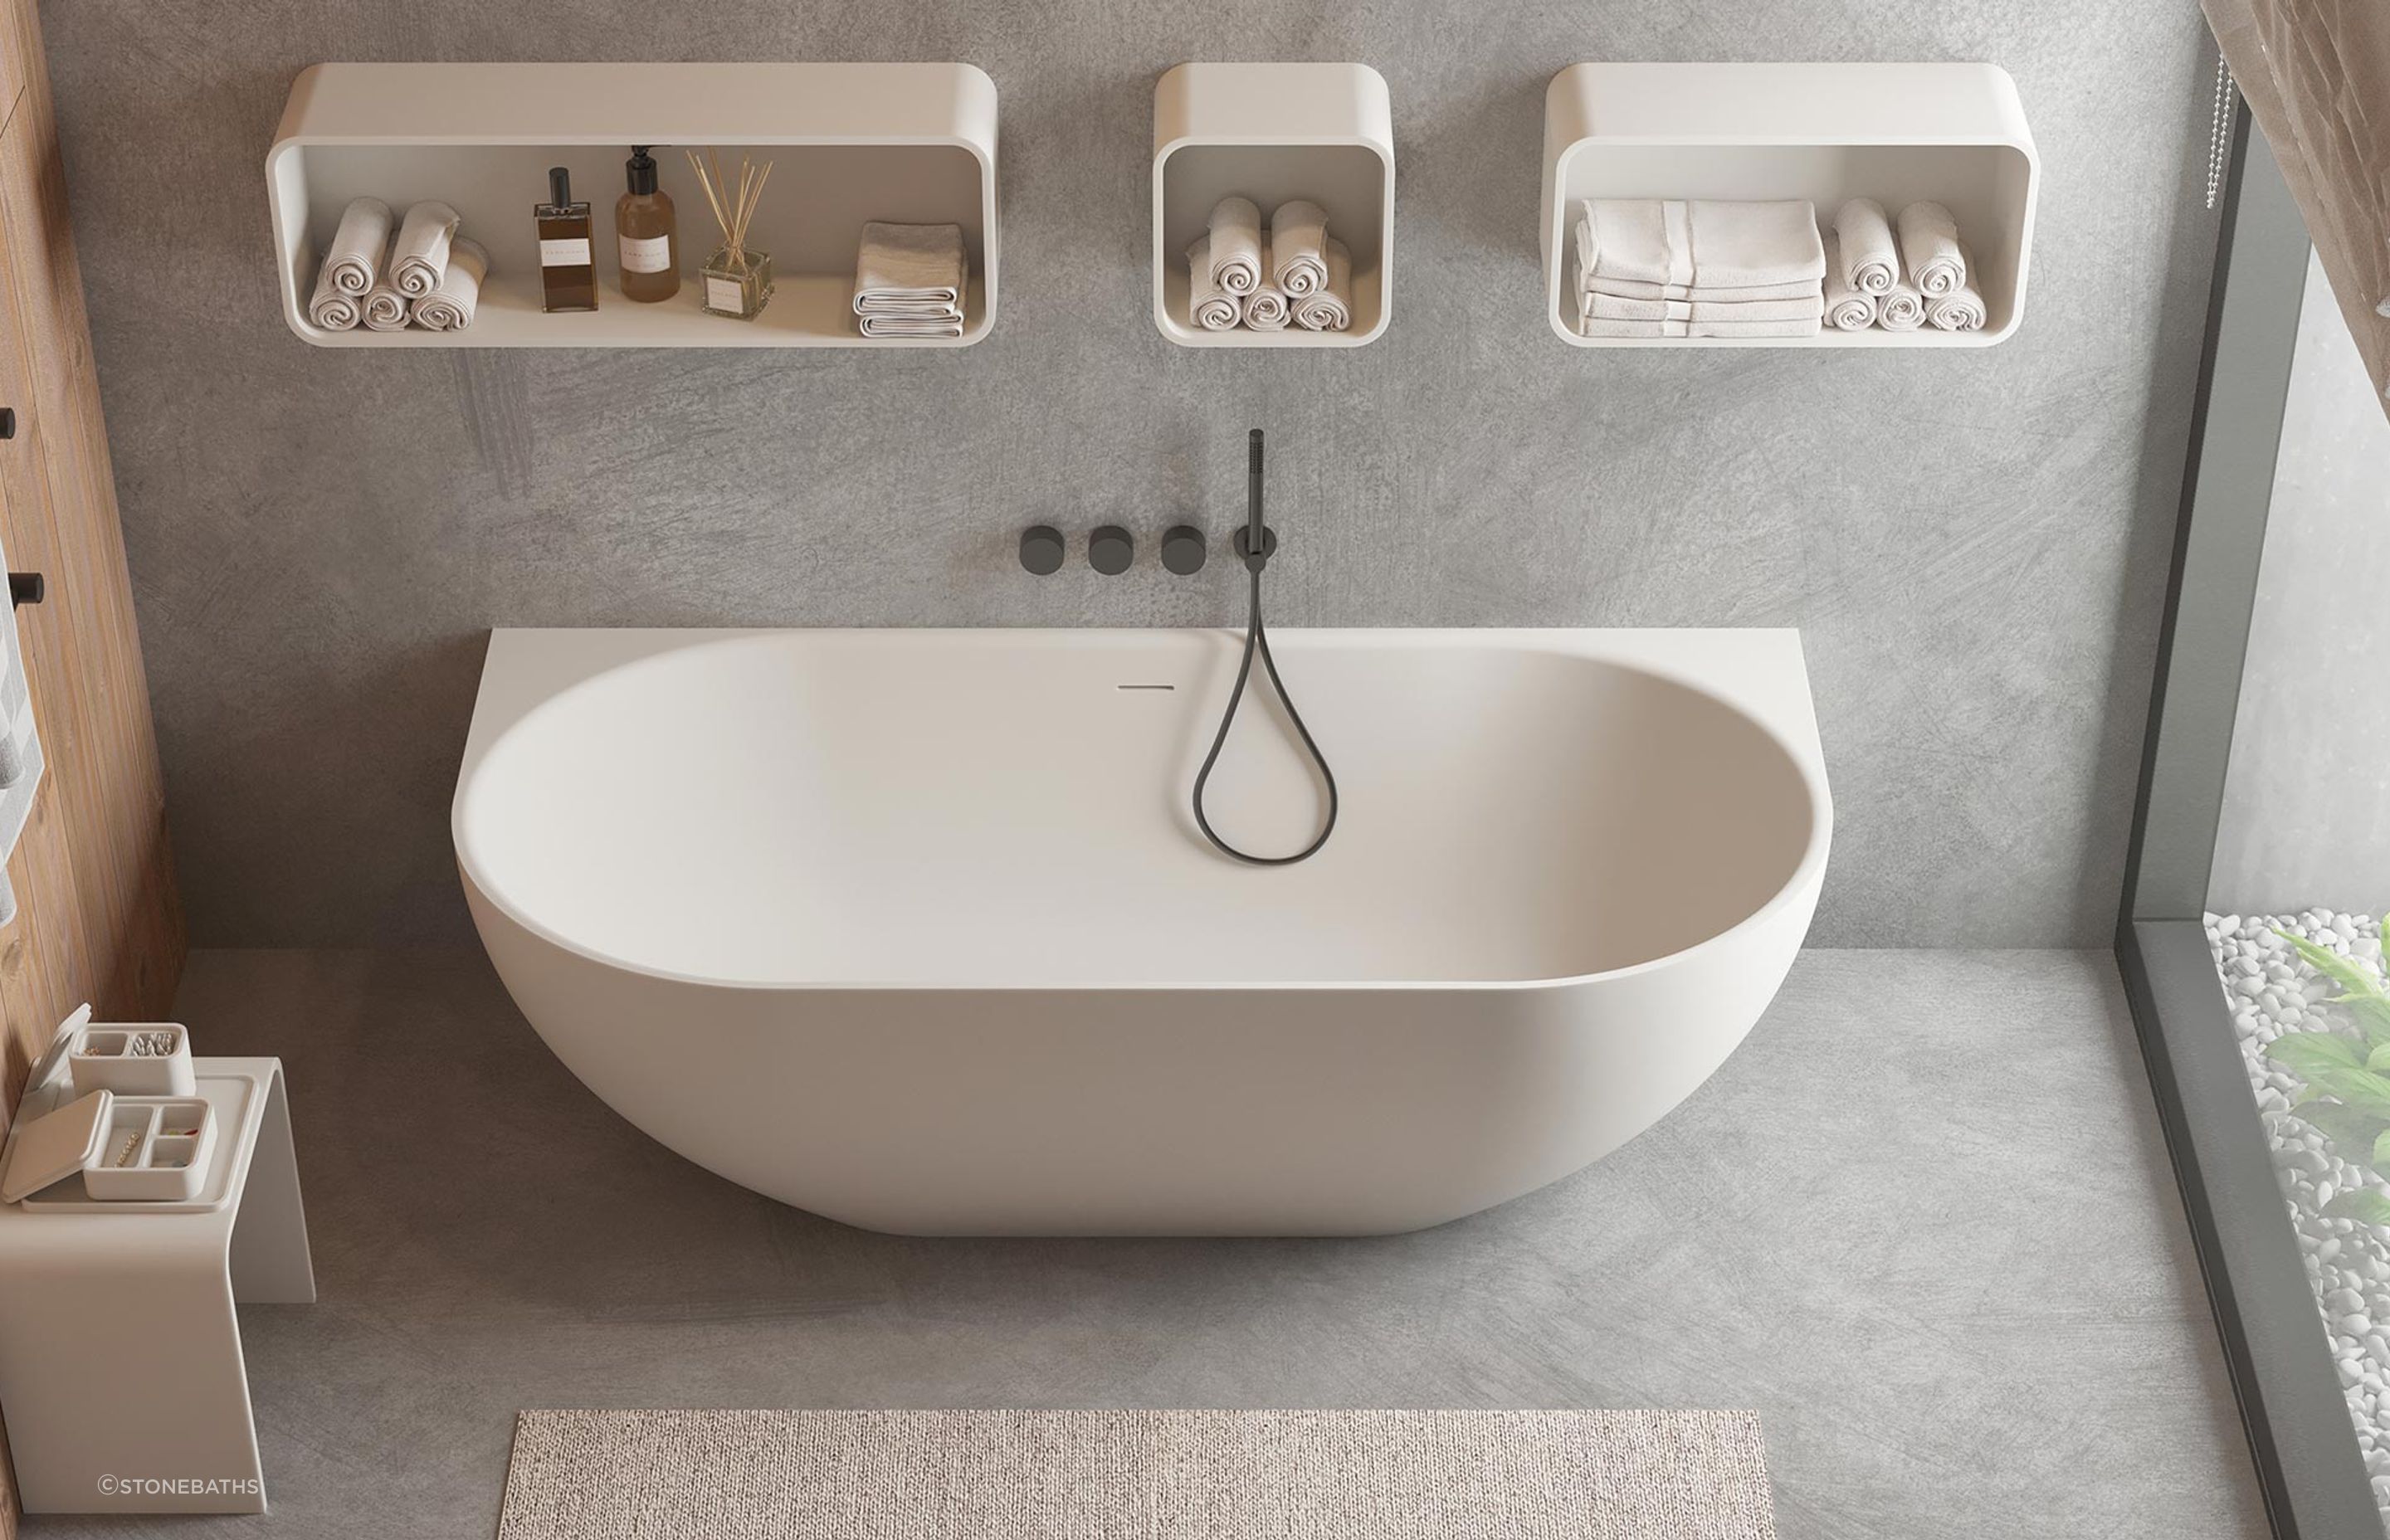 Bathtubs like the Justina Back-to-Wall Stone Bath offers great heat retention to help keep your bath and surrounding space warmer for longer.